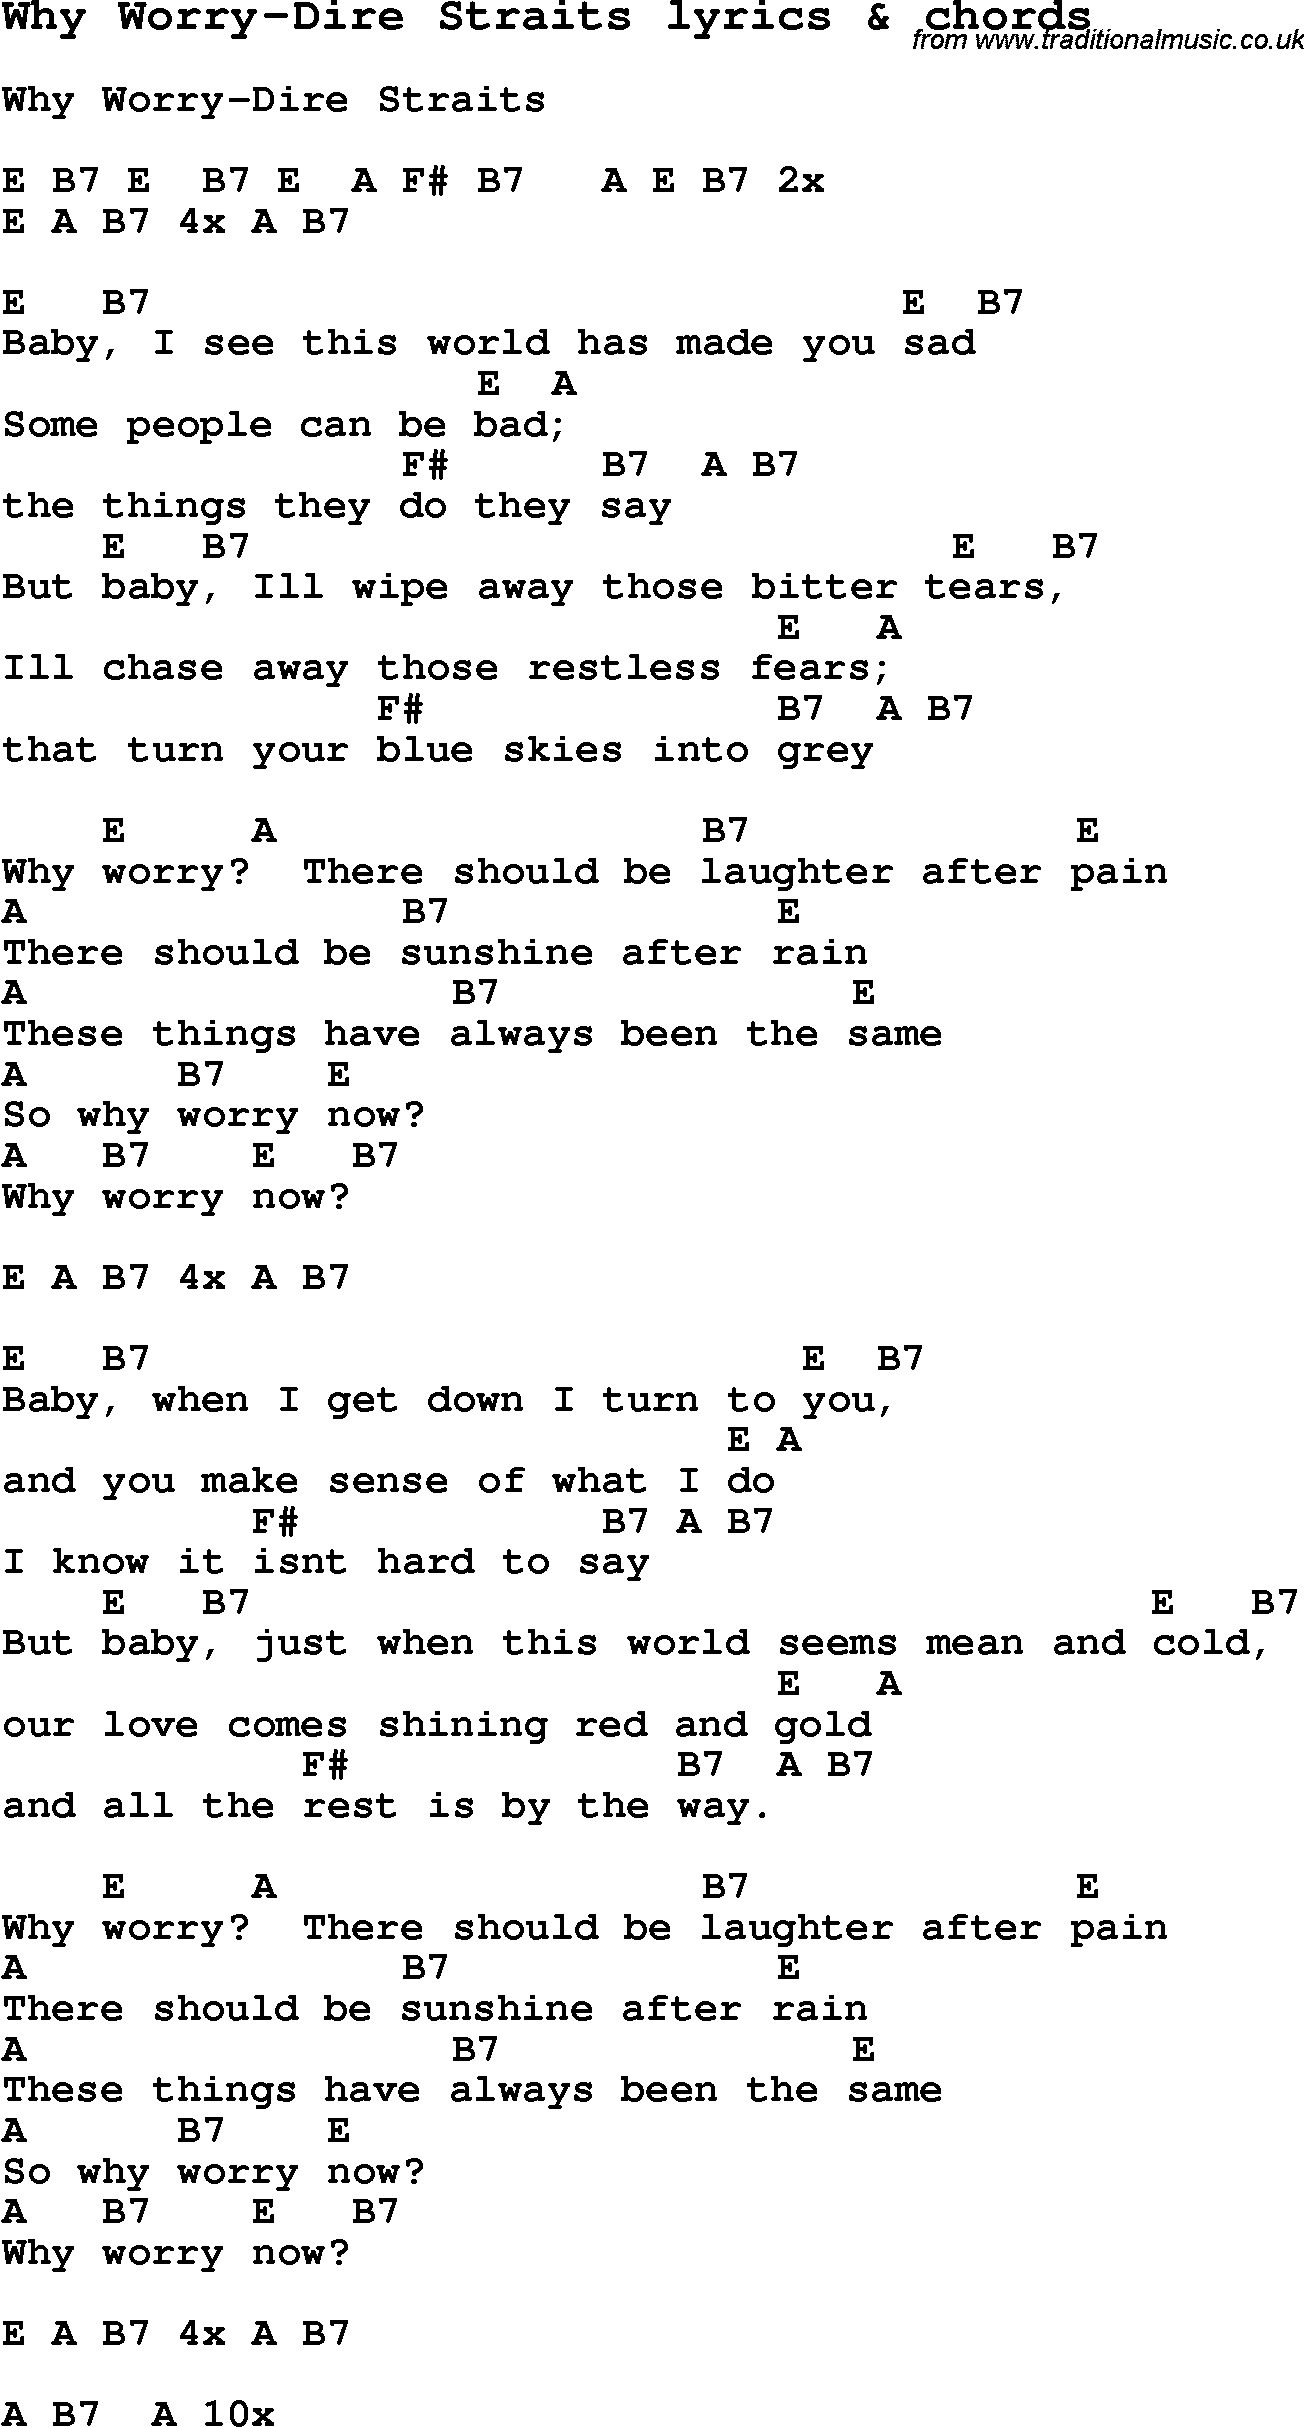 Love Song Lyrics For Why Worry Dire Straits With Chords